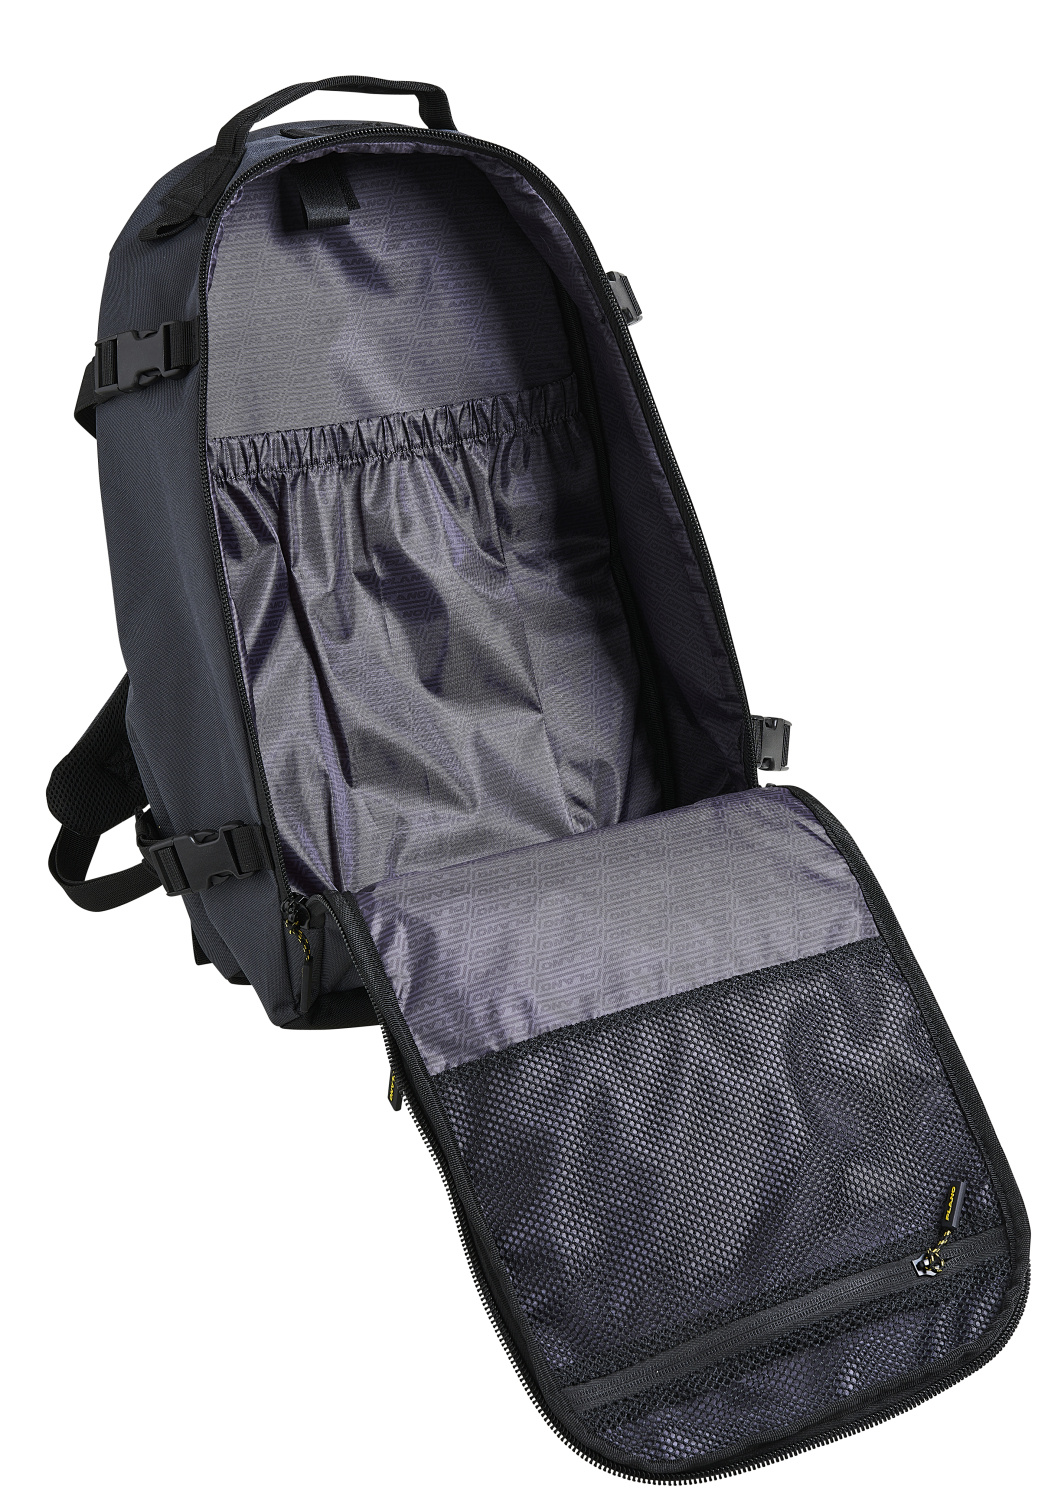 Plano Tactical Backpack